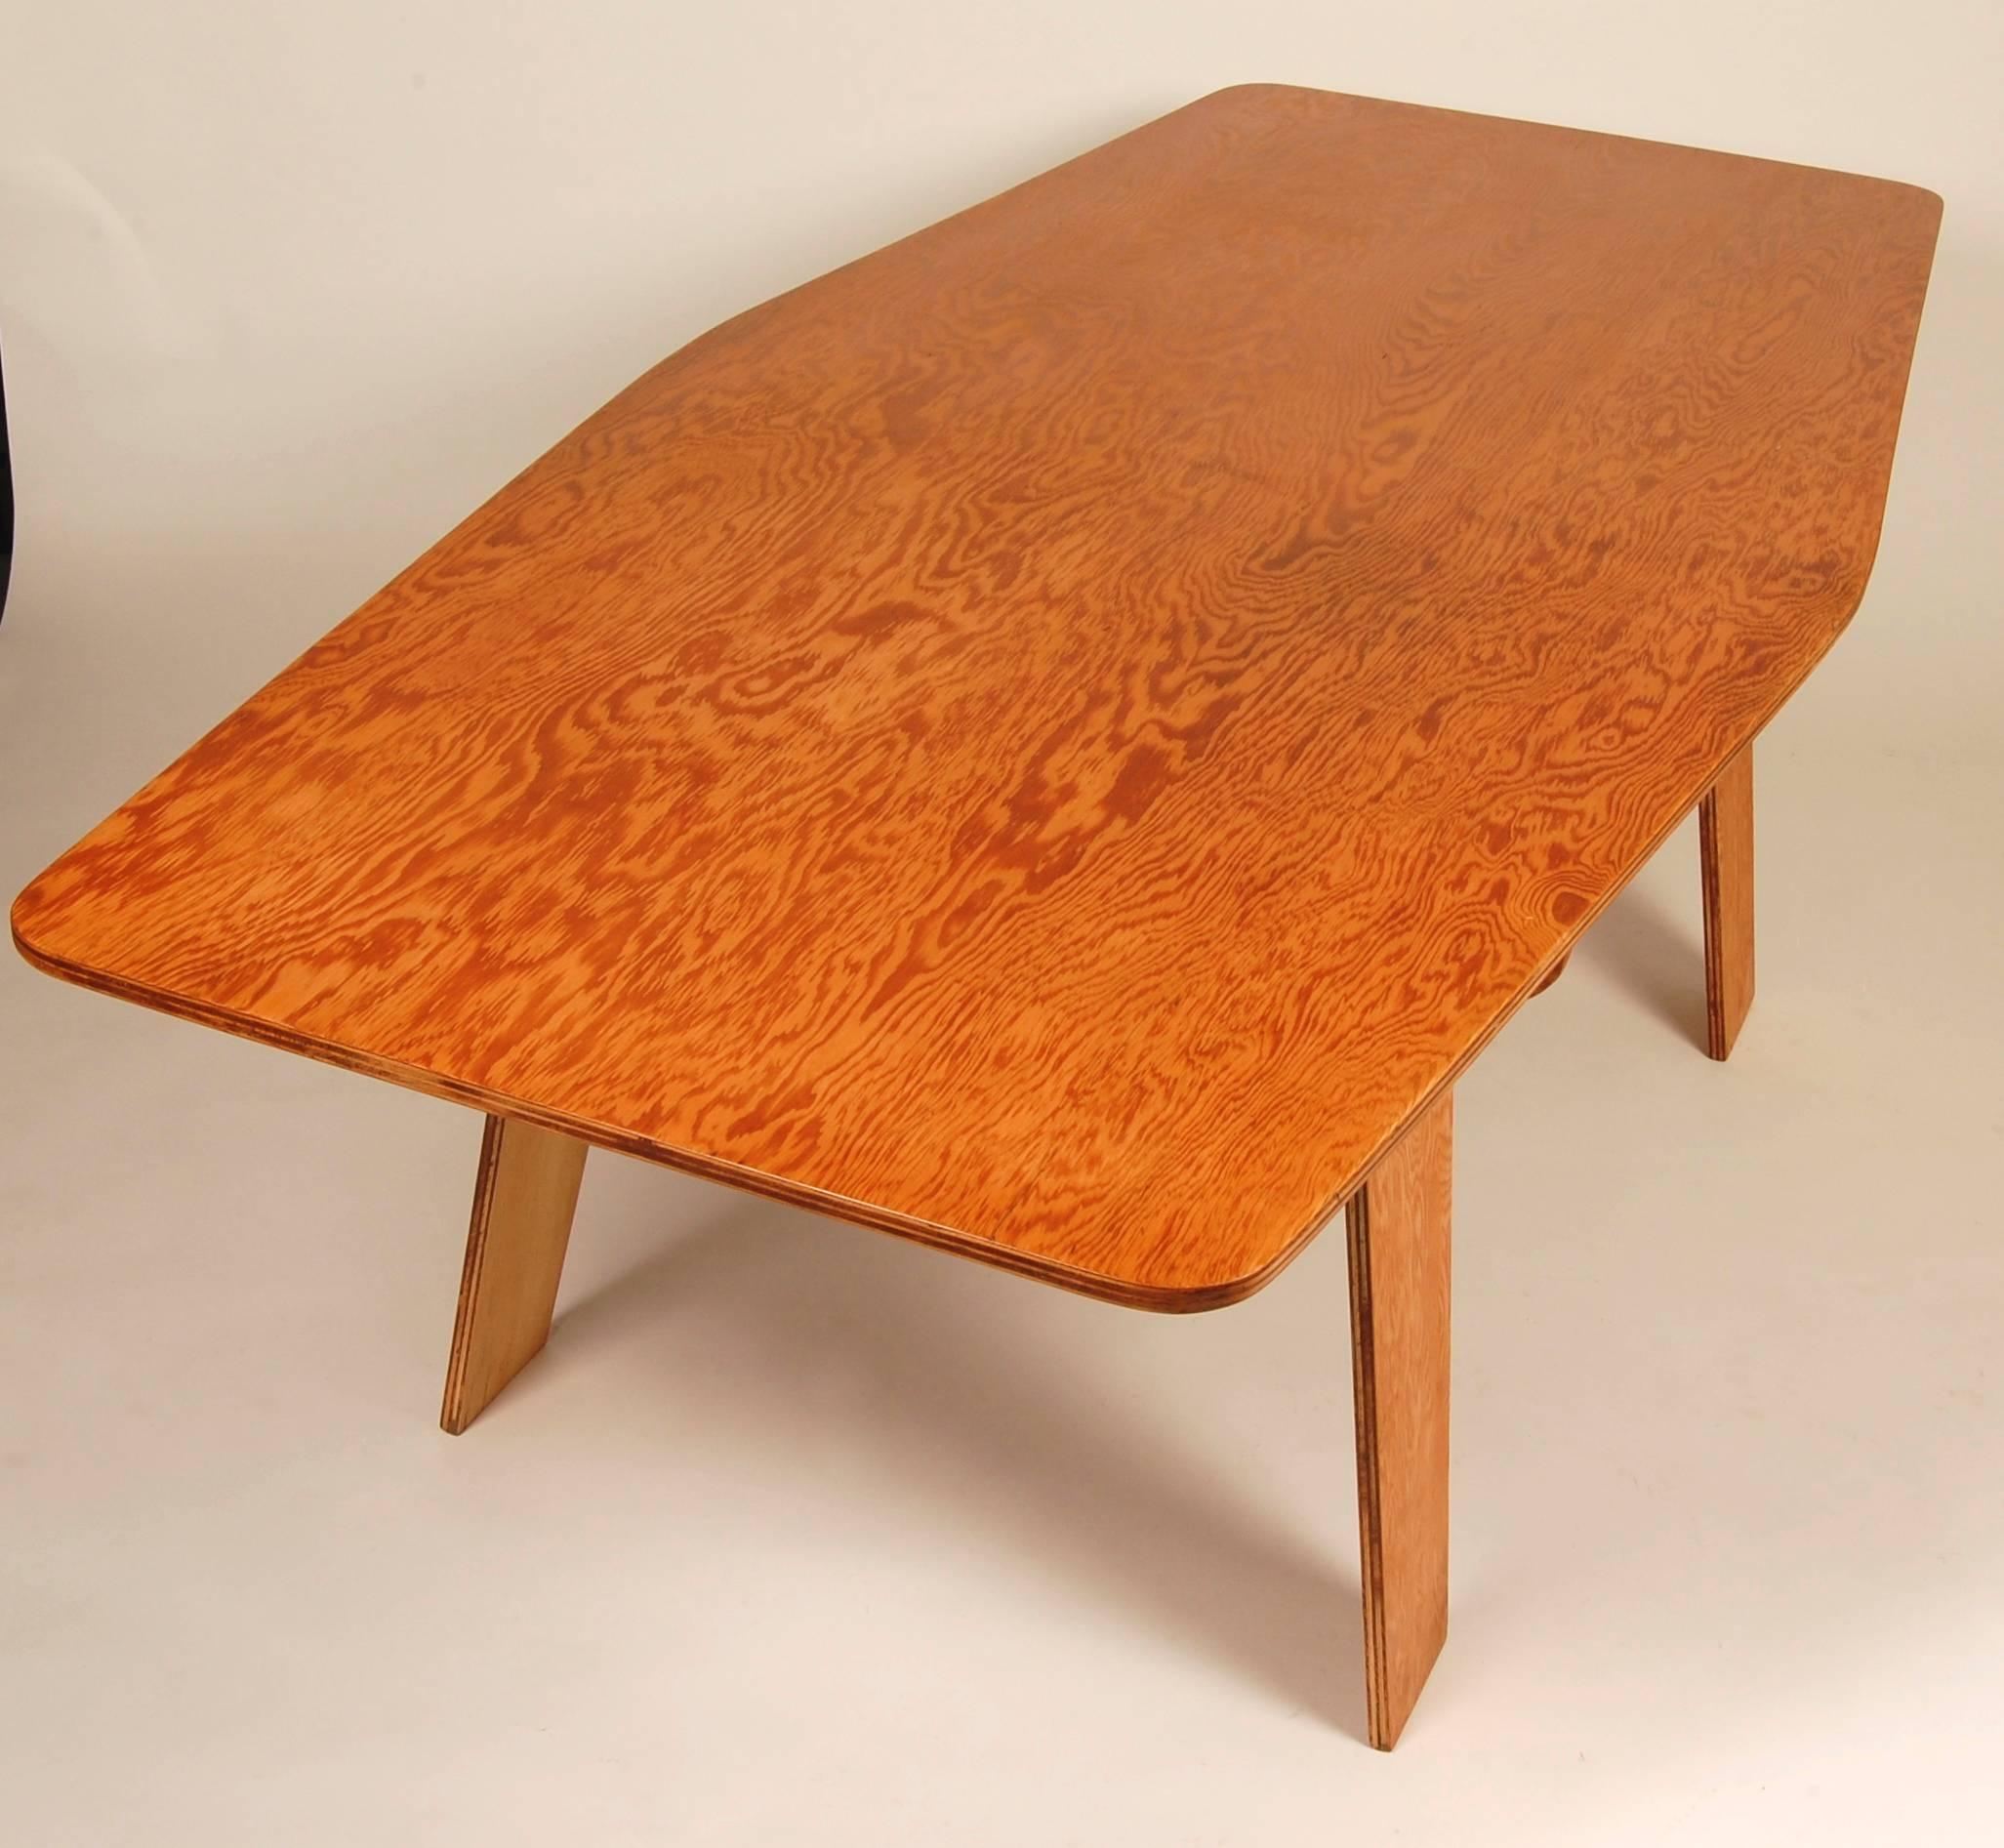 American Farnsworth Plywood Dining Table For Sale